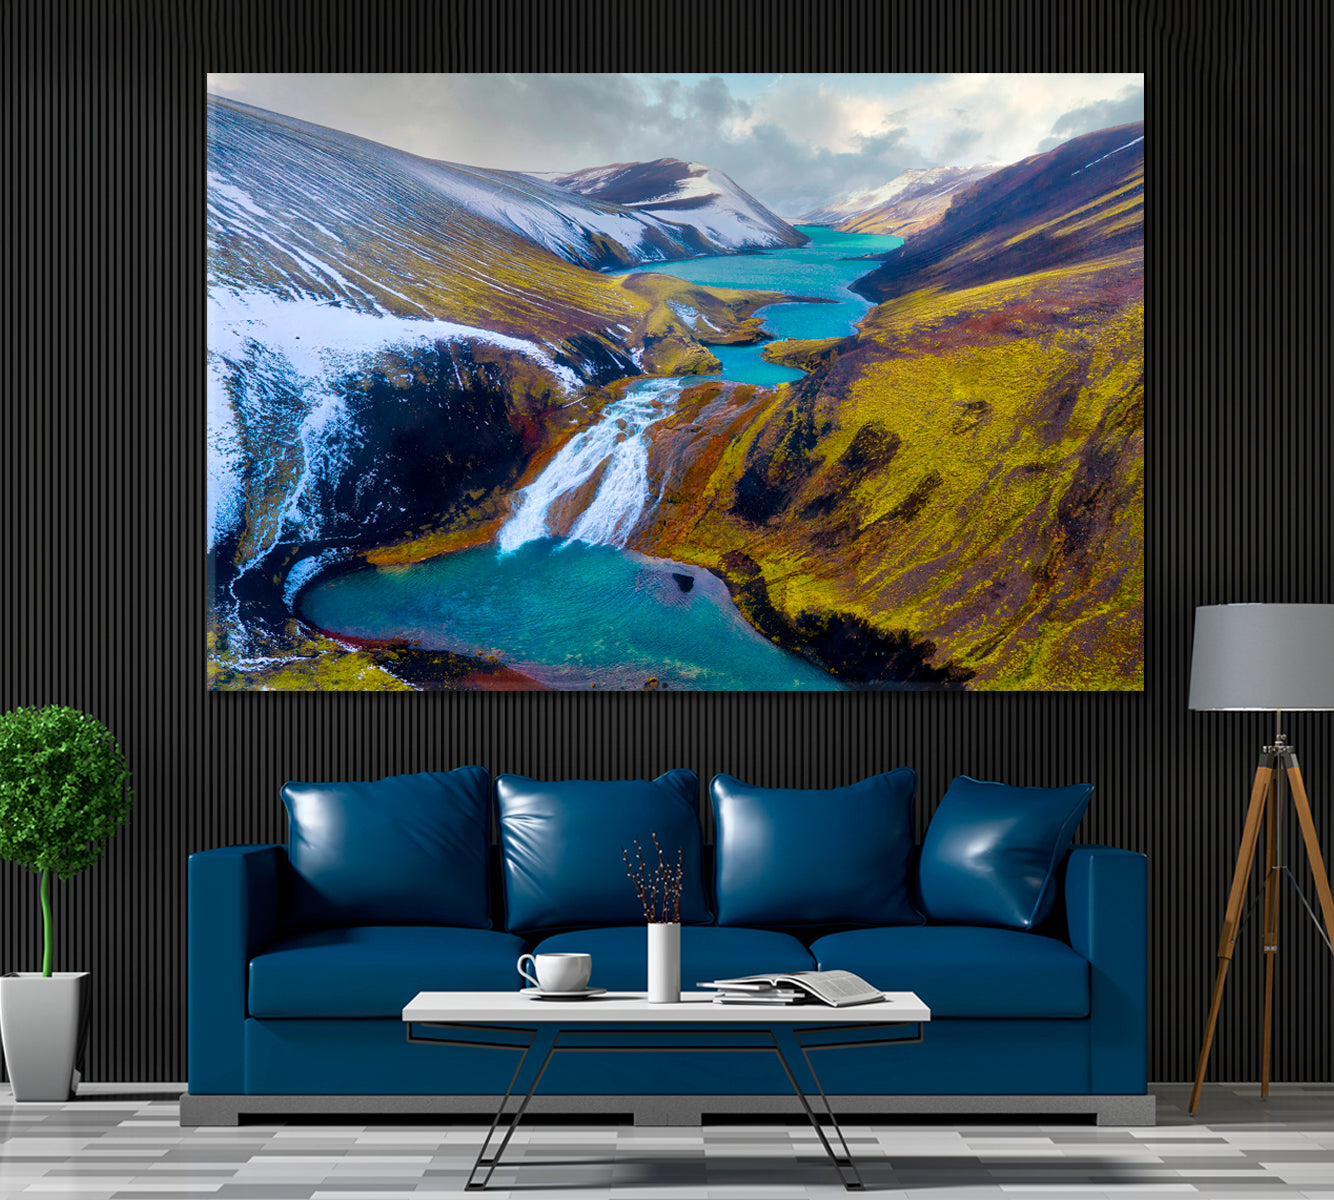 Raudibotn Crater Iceland Canvas Print ArtLexy 1 Panel 24"x16" inches 